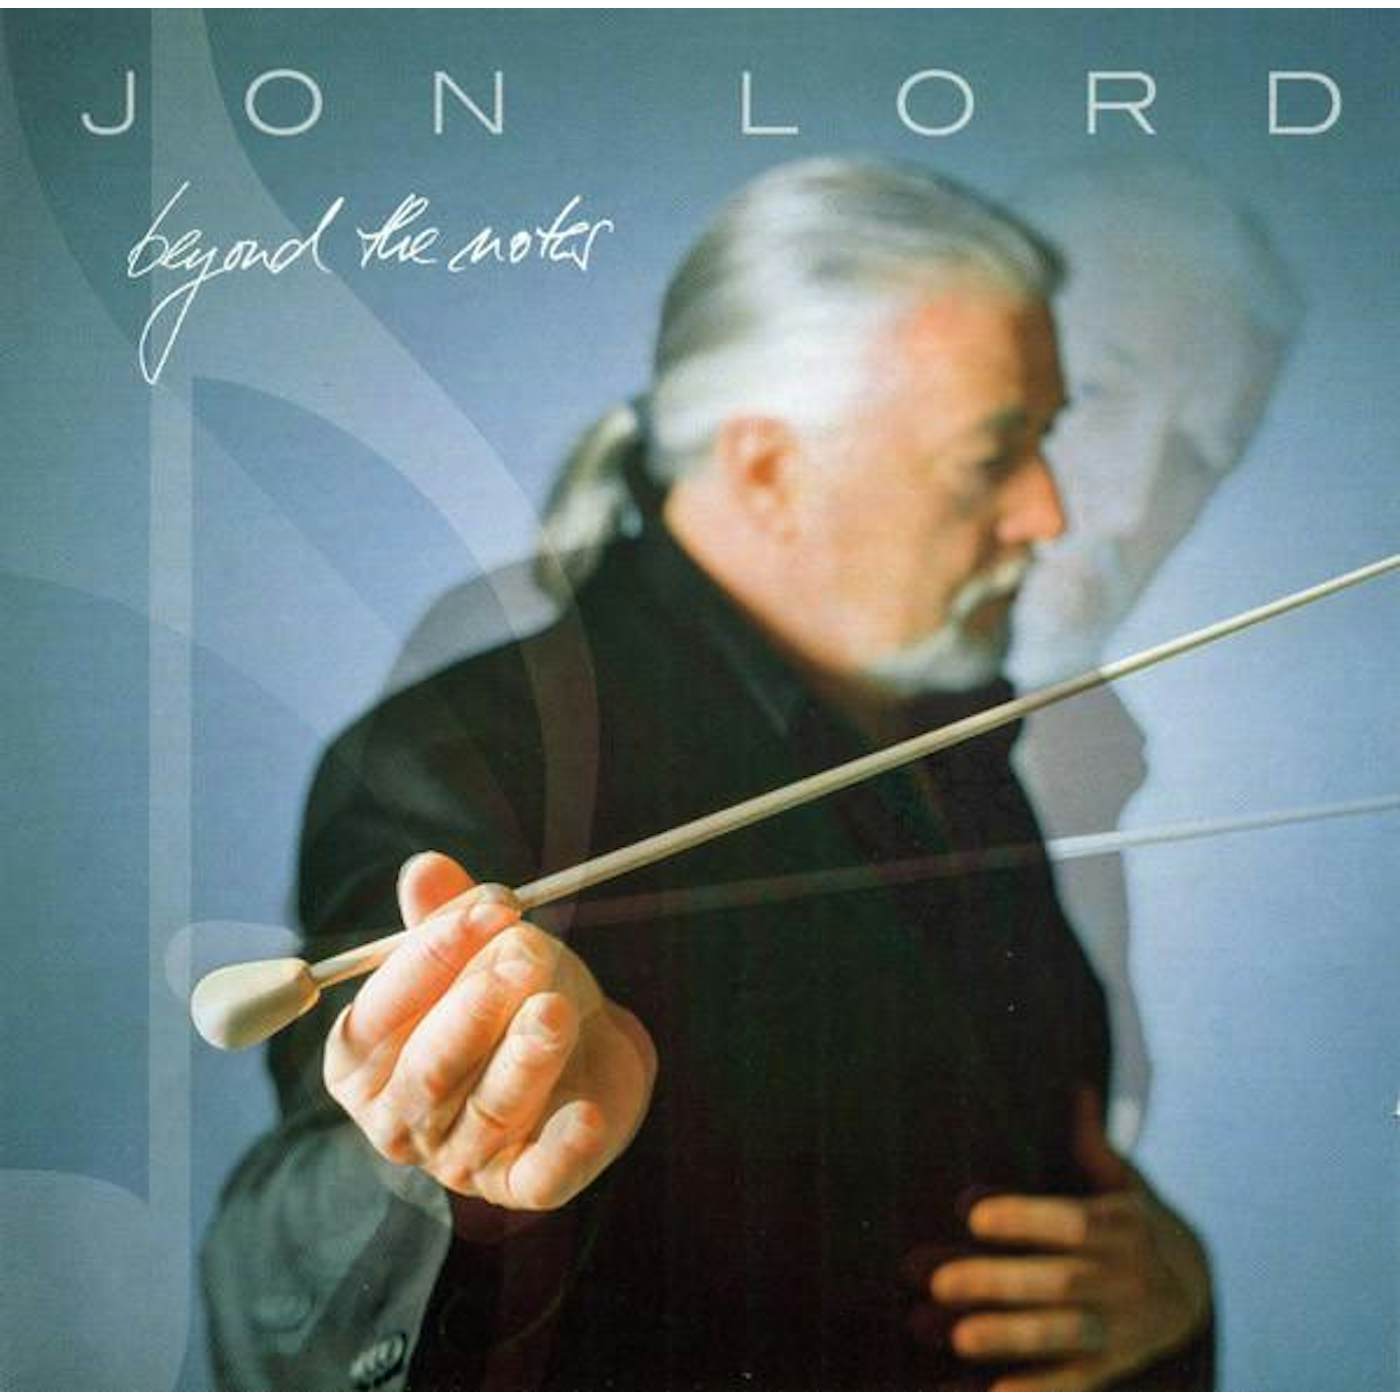 Jon Lord BEYOND THE NOTES CD